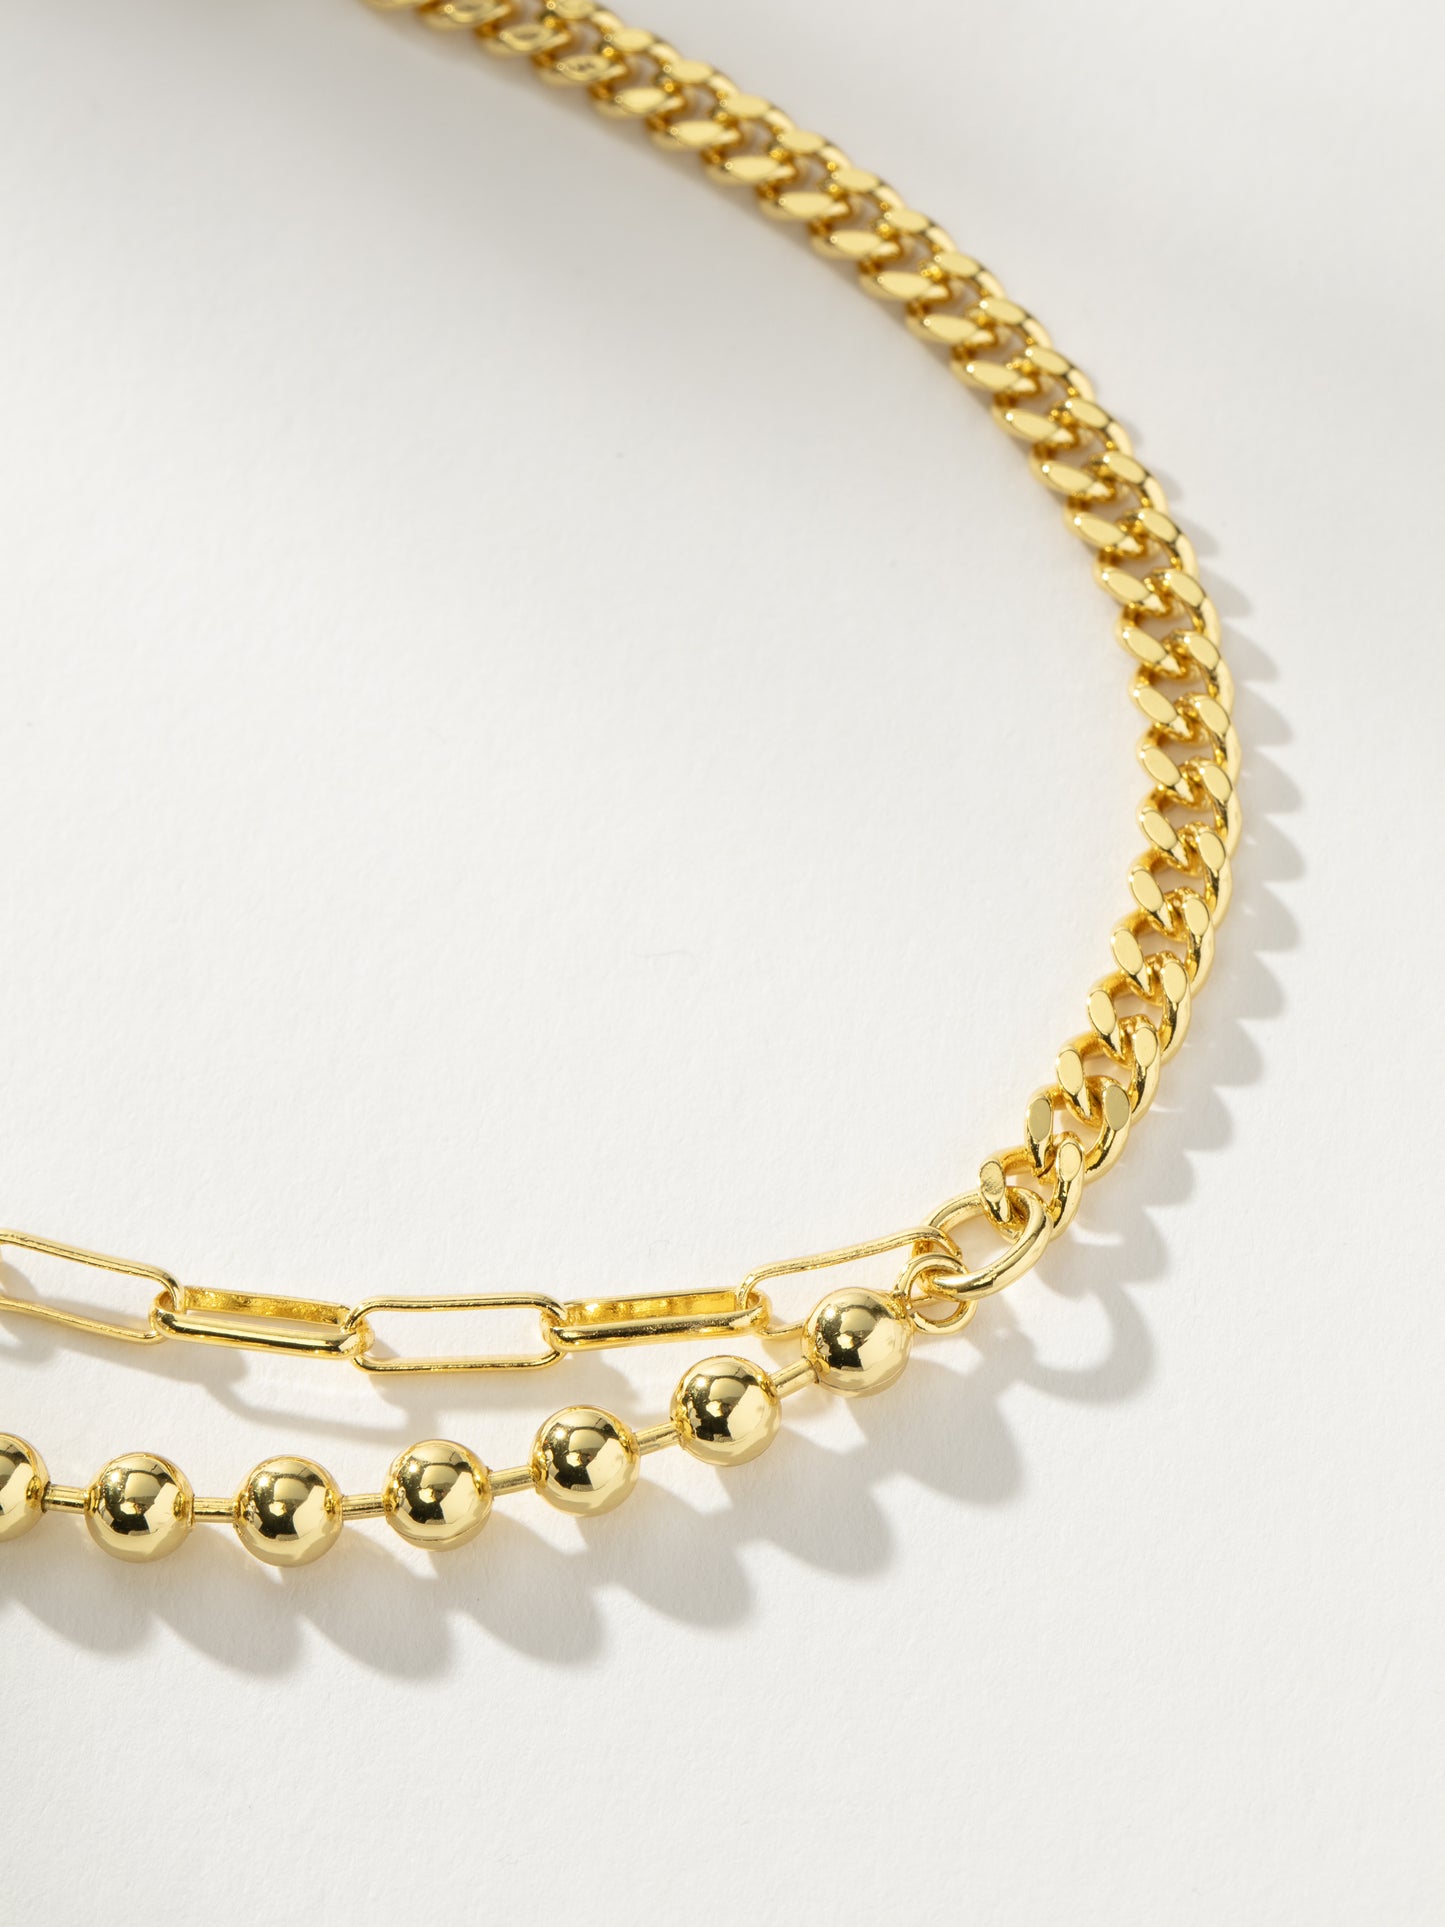 Three's a Party Chain Bracelet | Gold | Product Detail Image | Uncommon James